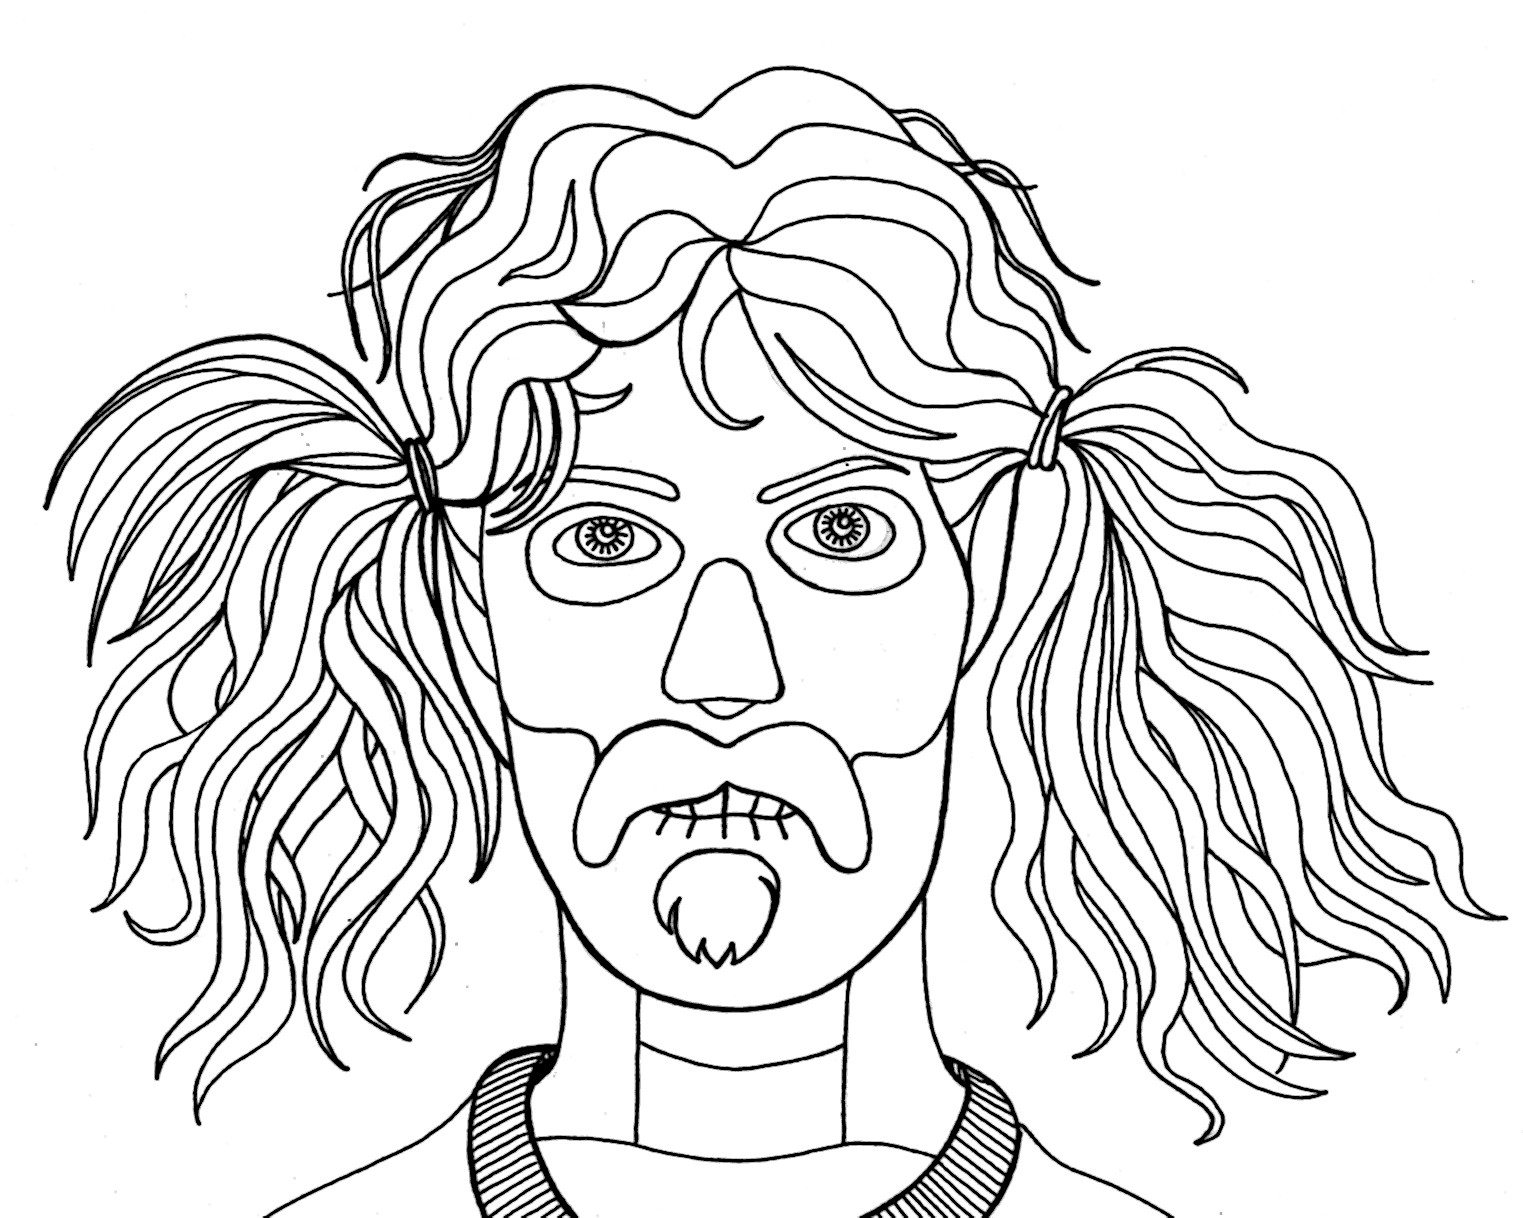 Weird Coloring Pages
 Yucca Flats N M Wenchkin s Coloring Pages Skele Zappa